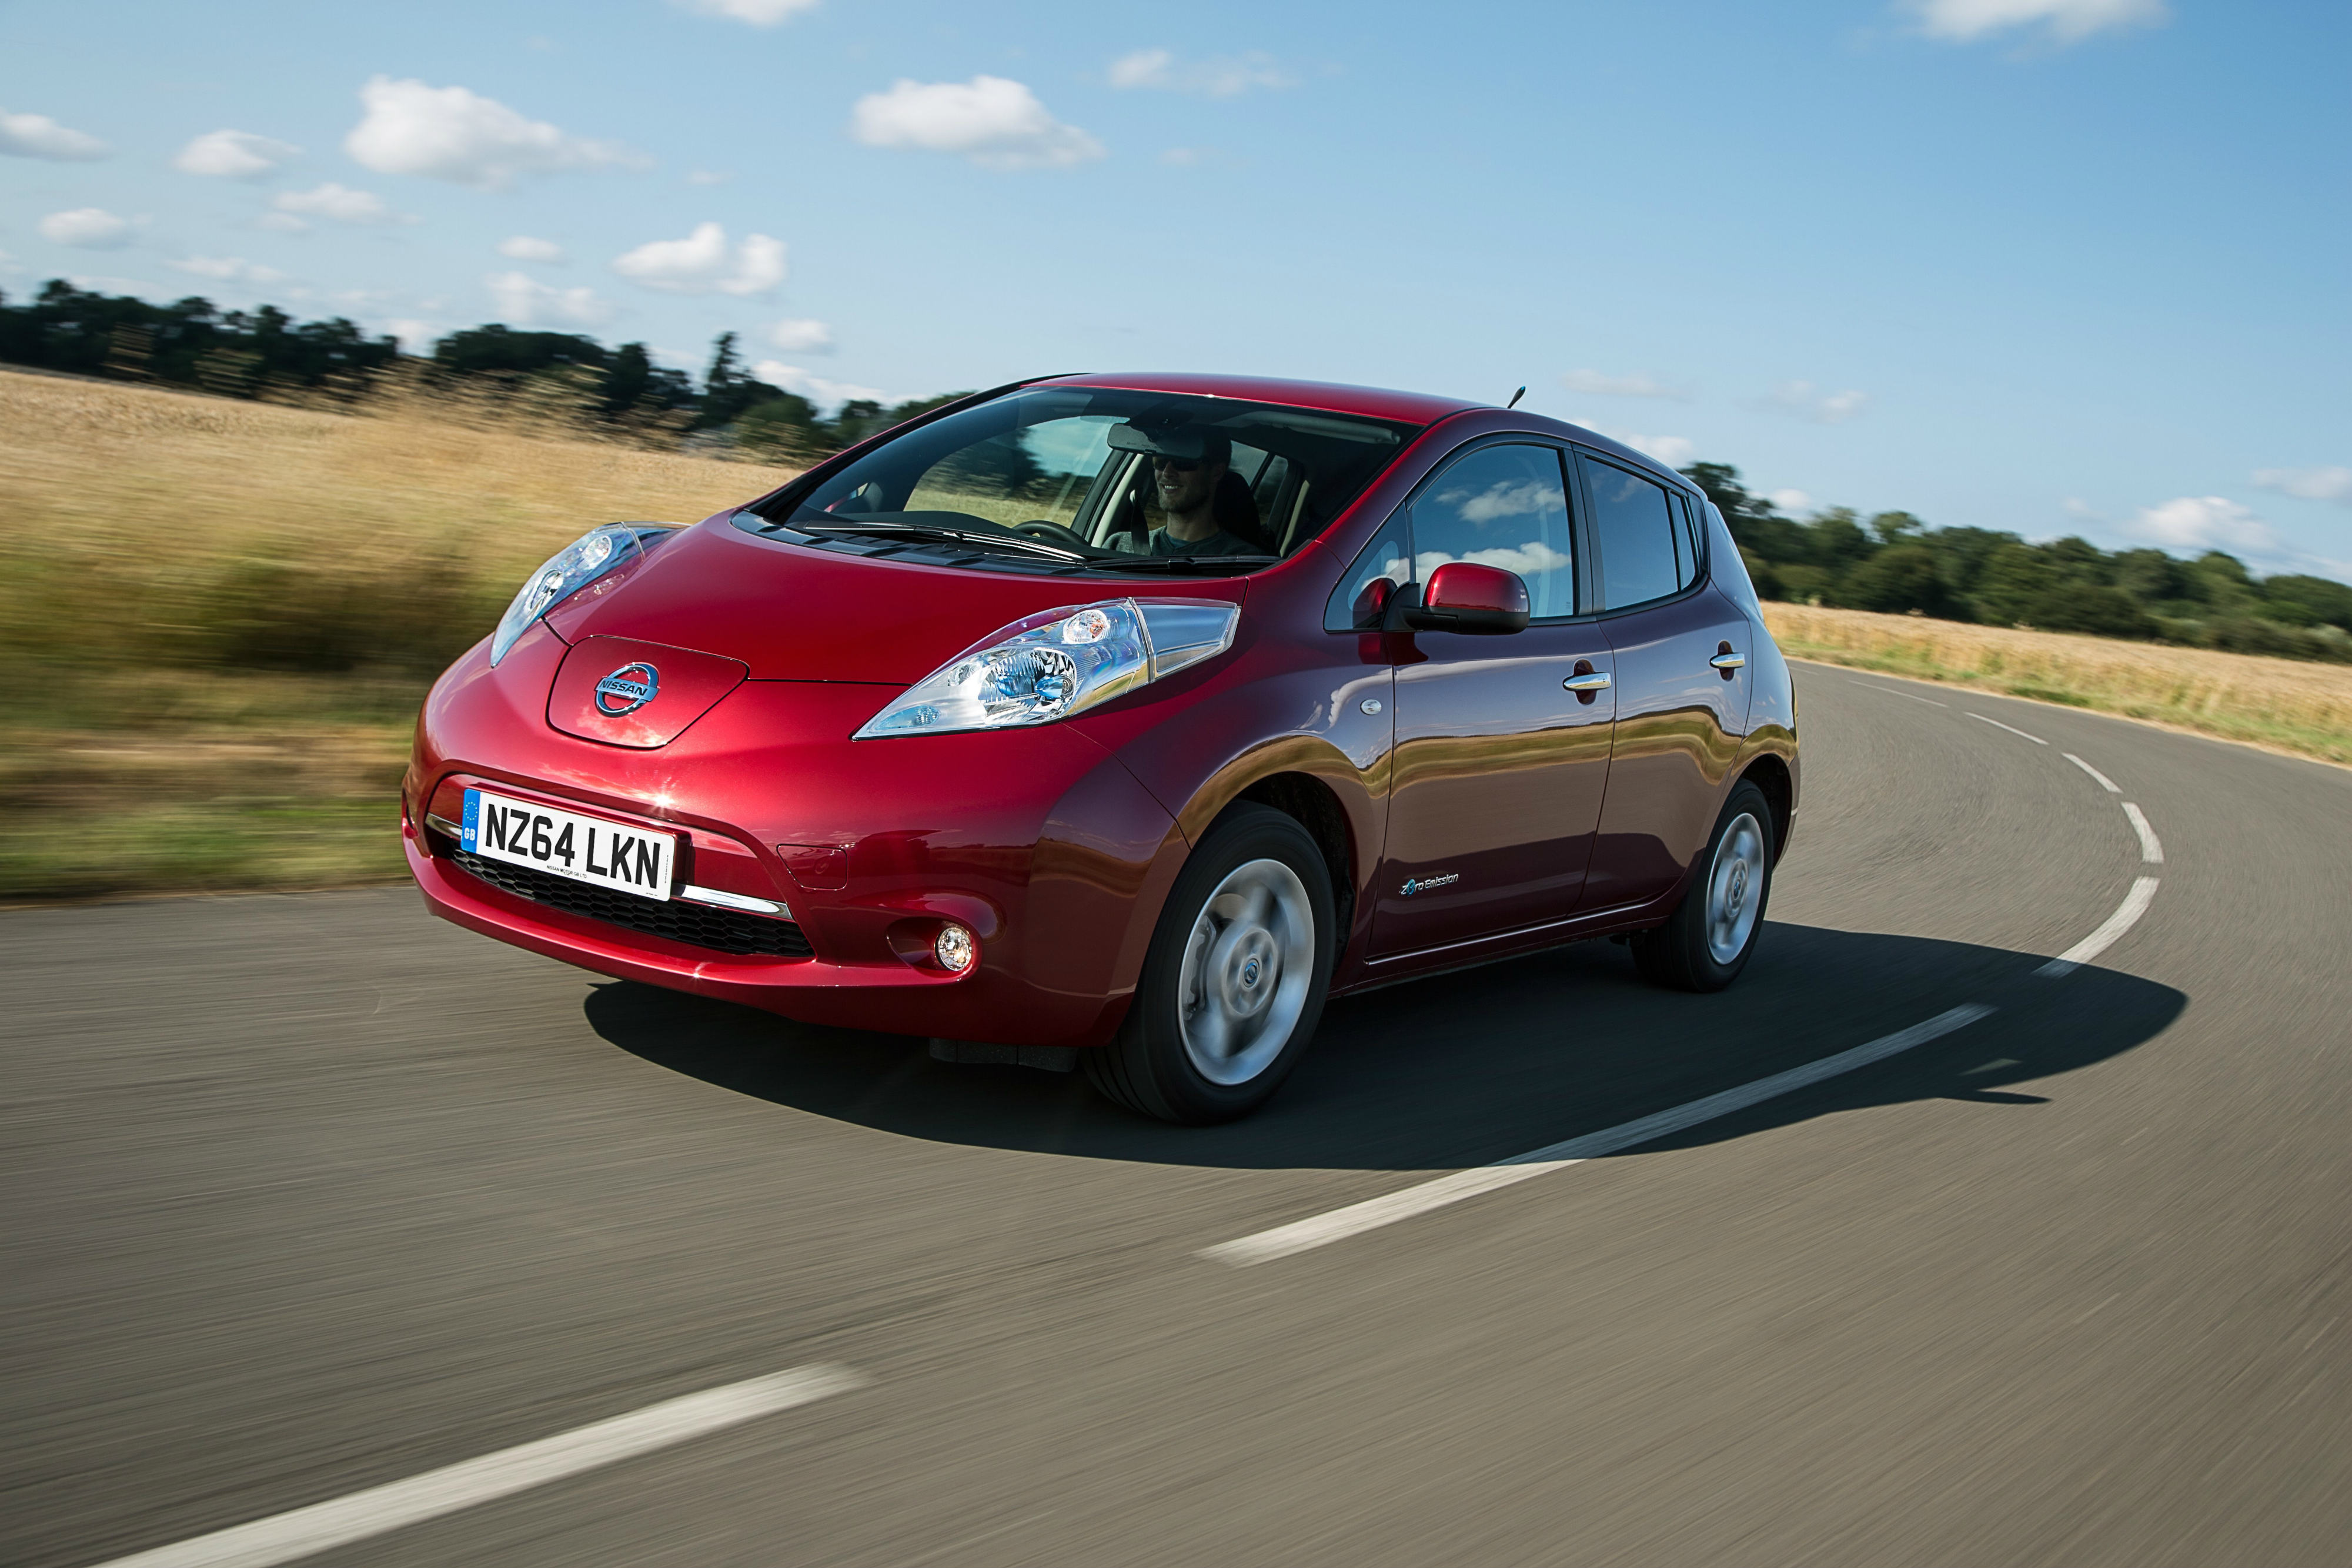 Used car buying guide: super-saver plug-in electric cars, including the Nissan Leaf